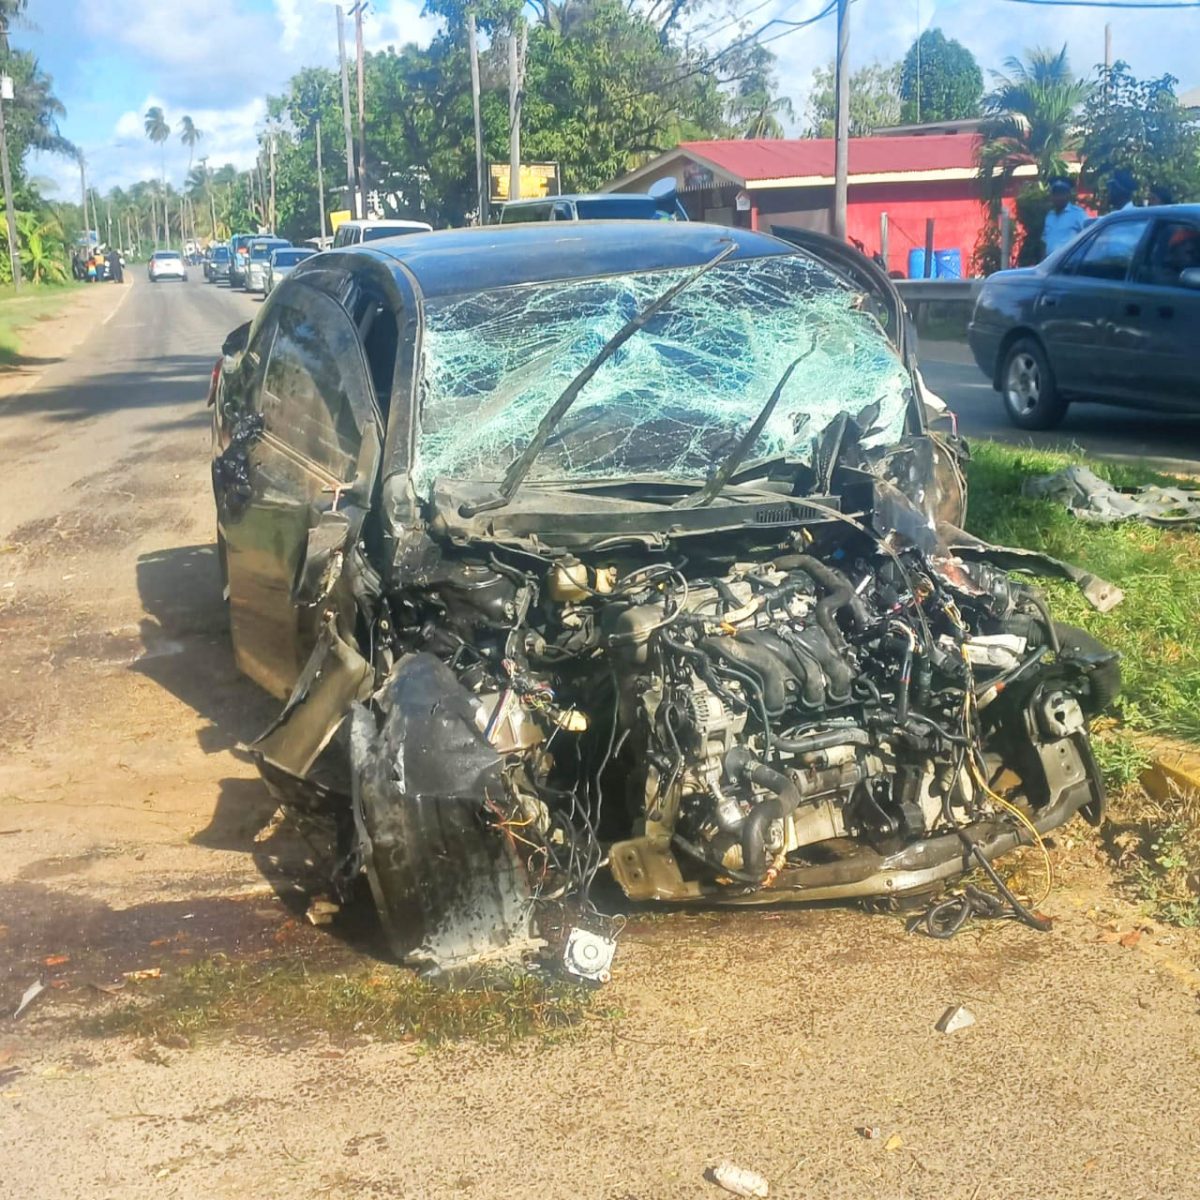 The mangled vehicle after the accident.